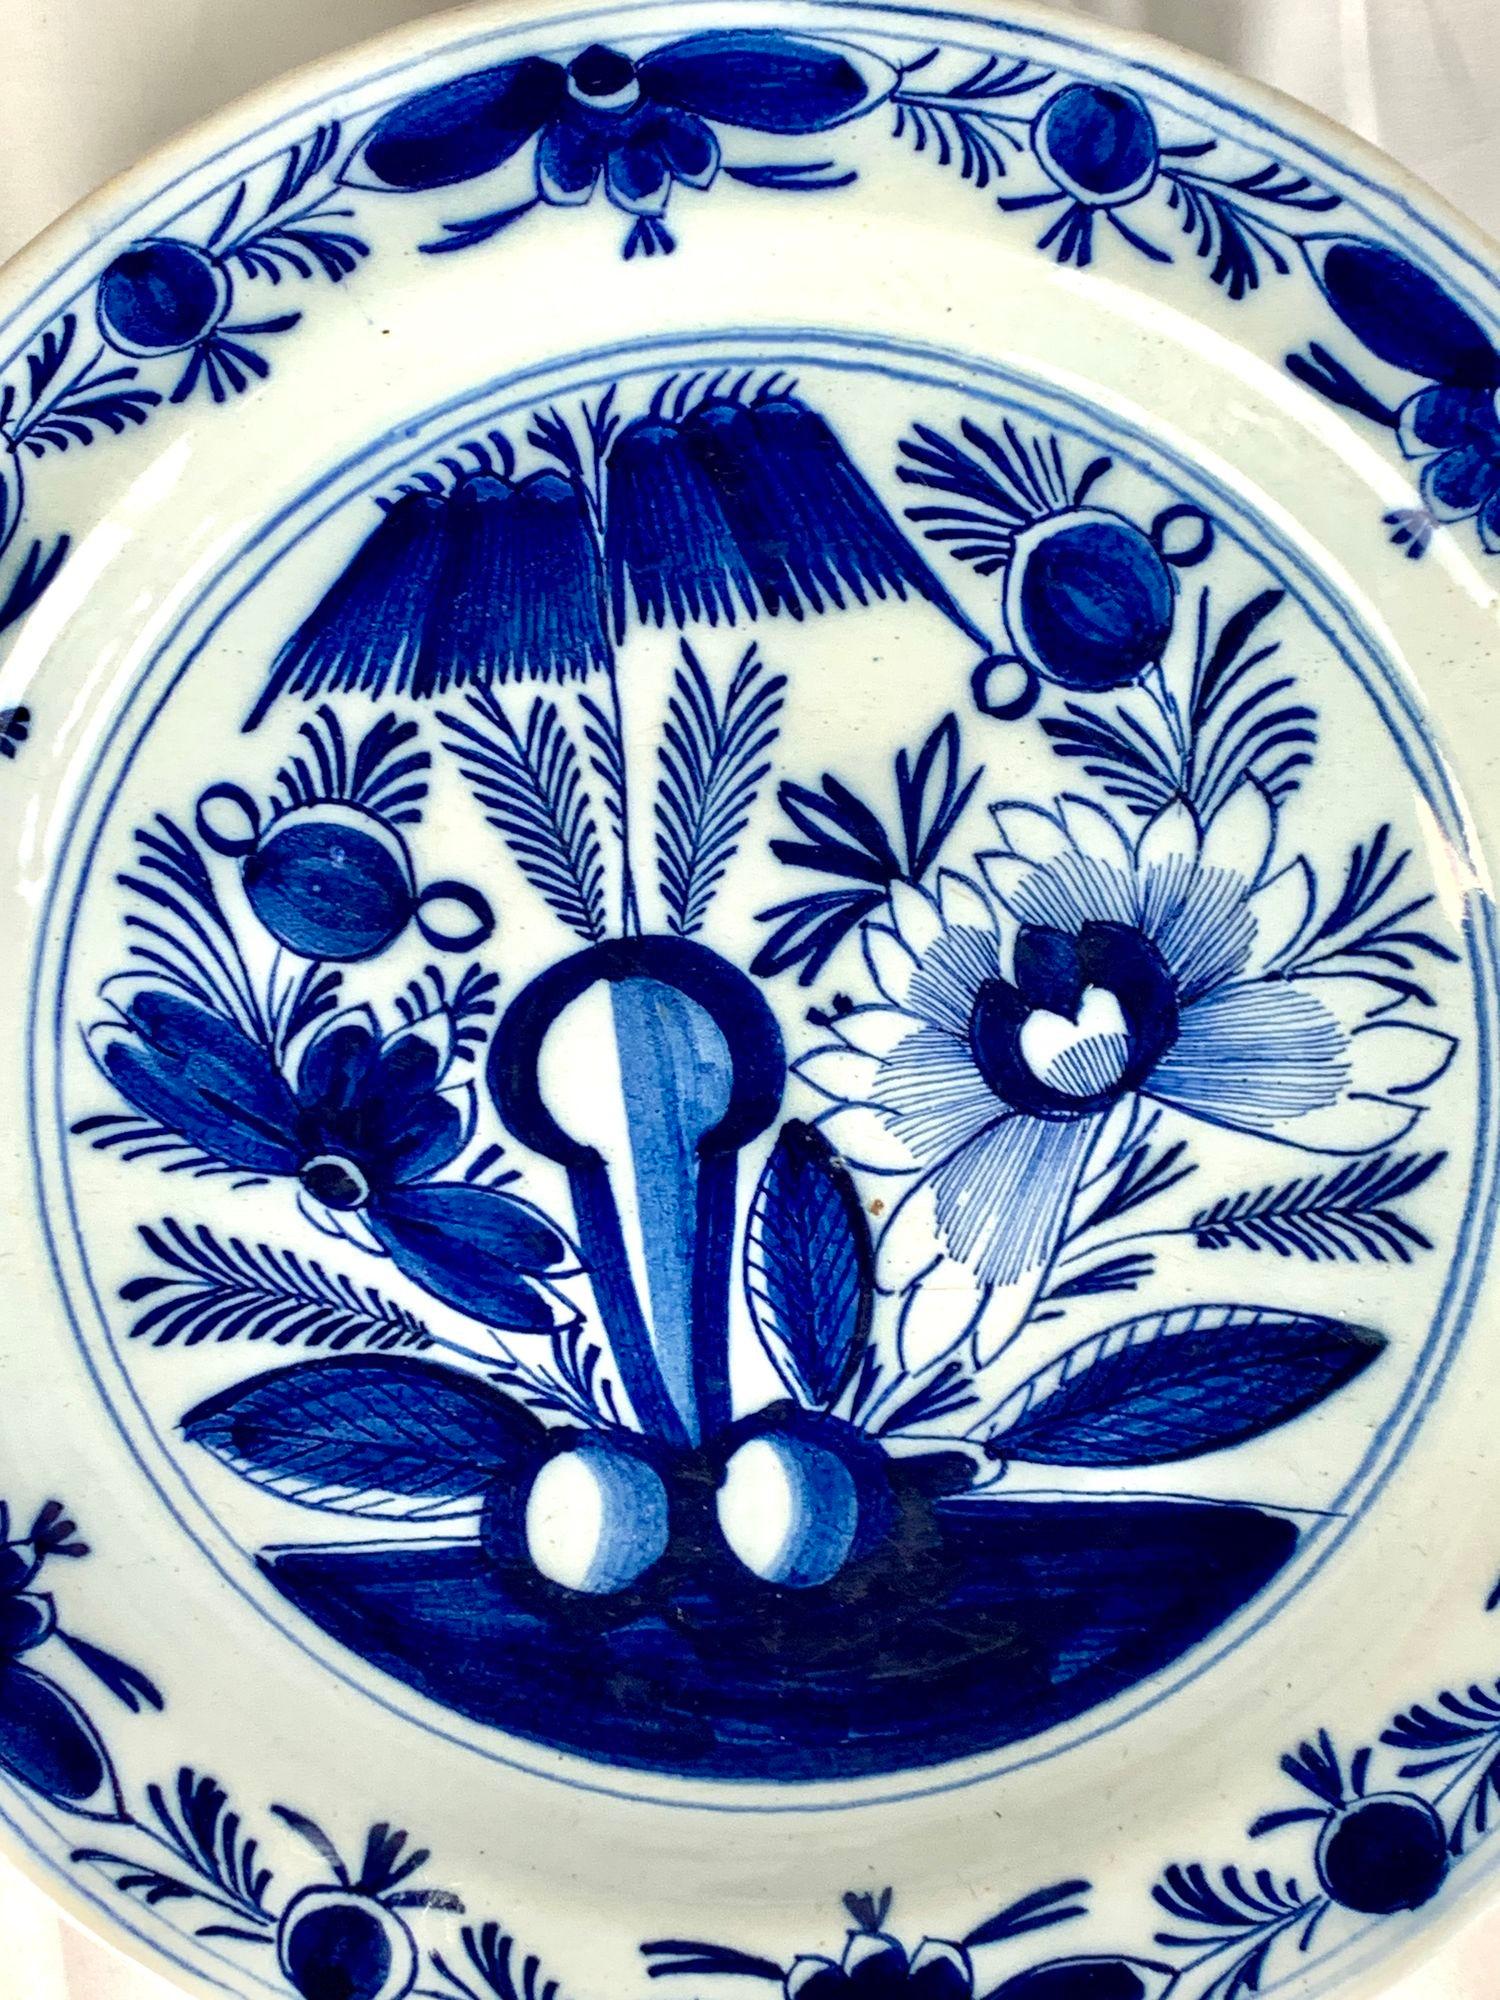 This blue and white Delft charger was hand painted in the Netherlands circa 1800.
The center features a garden scene with beautiful flowering peonies.
We see blossoming flowers, buds, leaves, and rockwork.
The wide border shows a lovely repeating